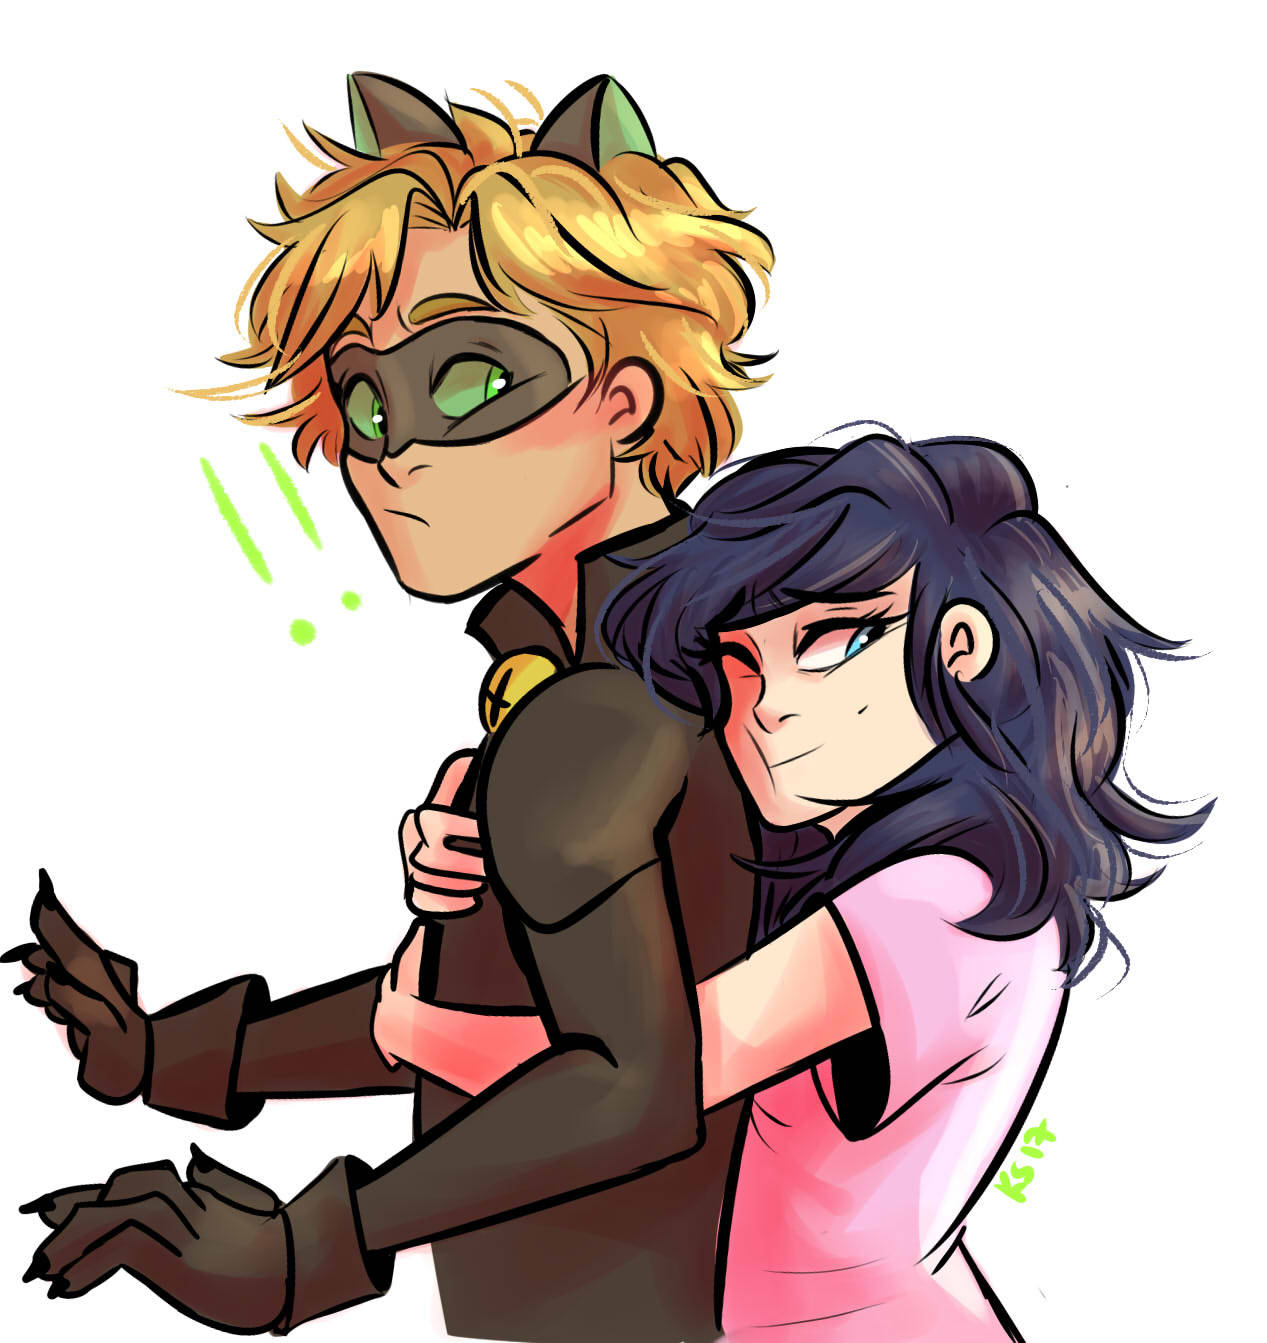 Chat noir and marianette